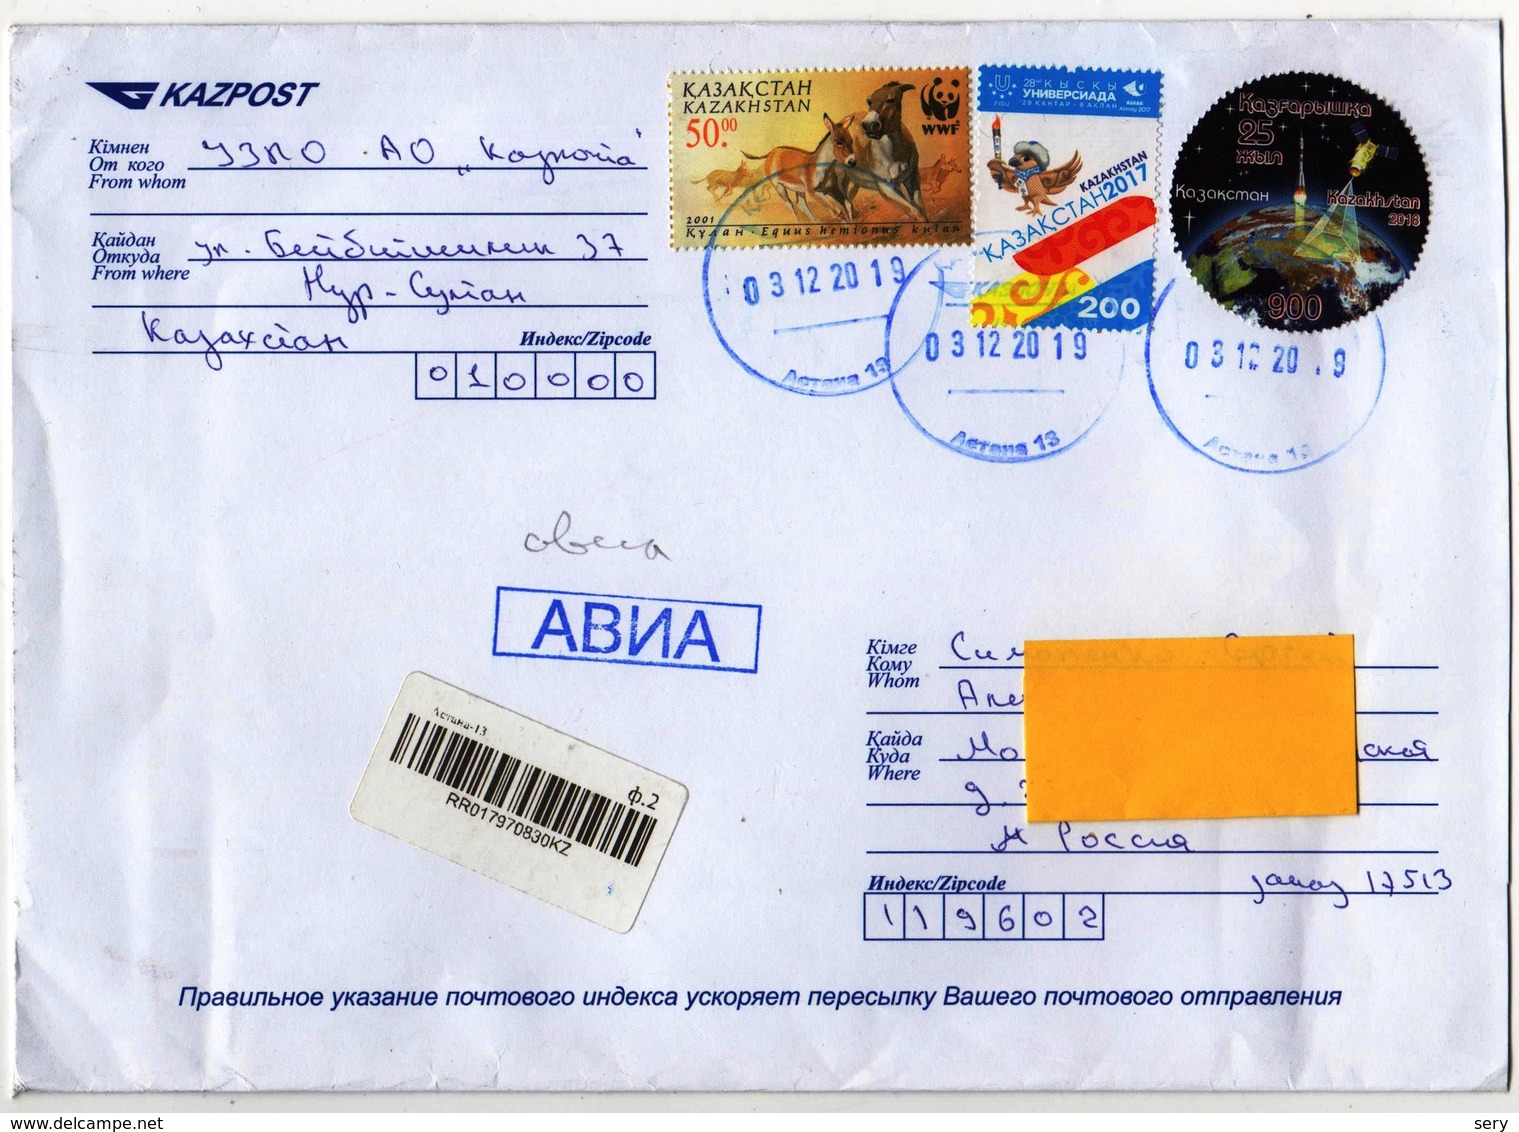 Registered Letter From Kazakhstan To Russia 2019 Wild Animals Kulan Sports Space Communication - Asia